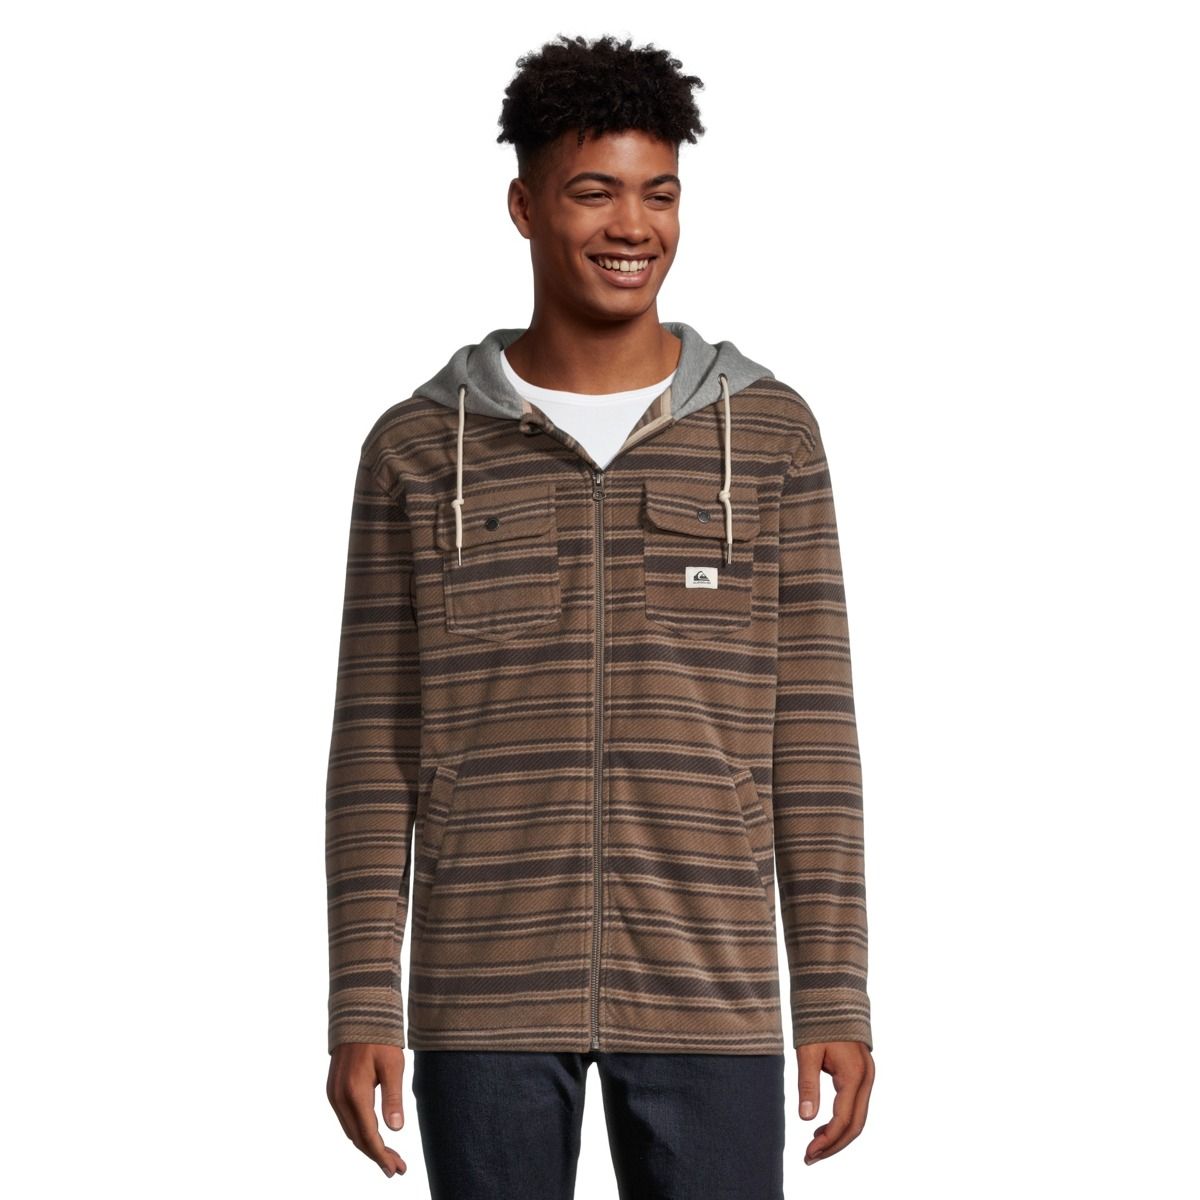 Image of Quiksilver Men's Super Swell Hooded Flannel Top